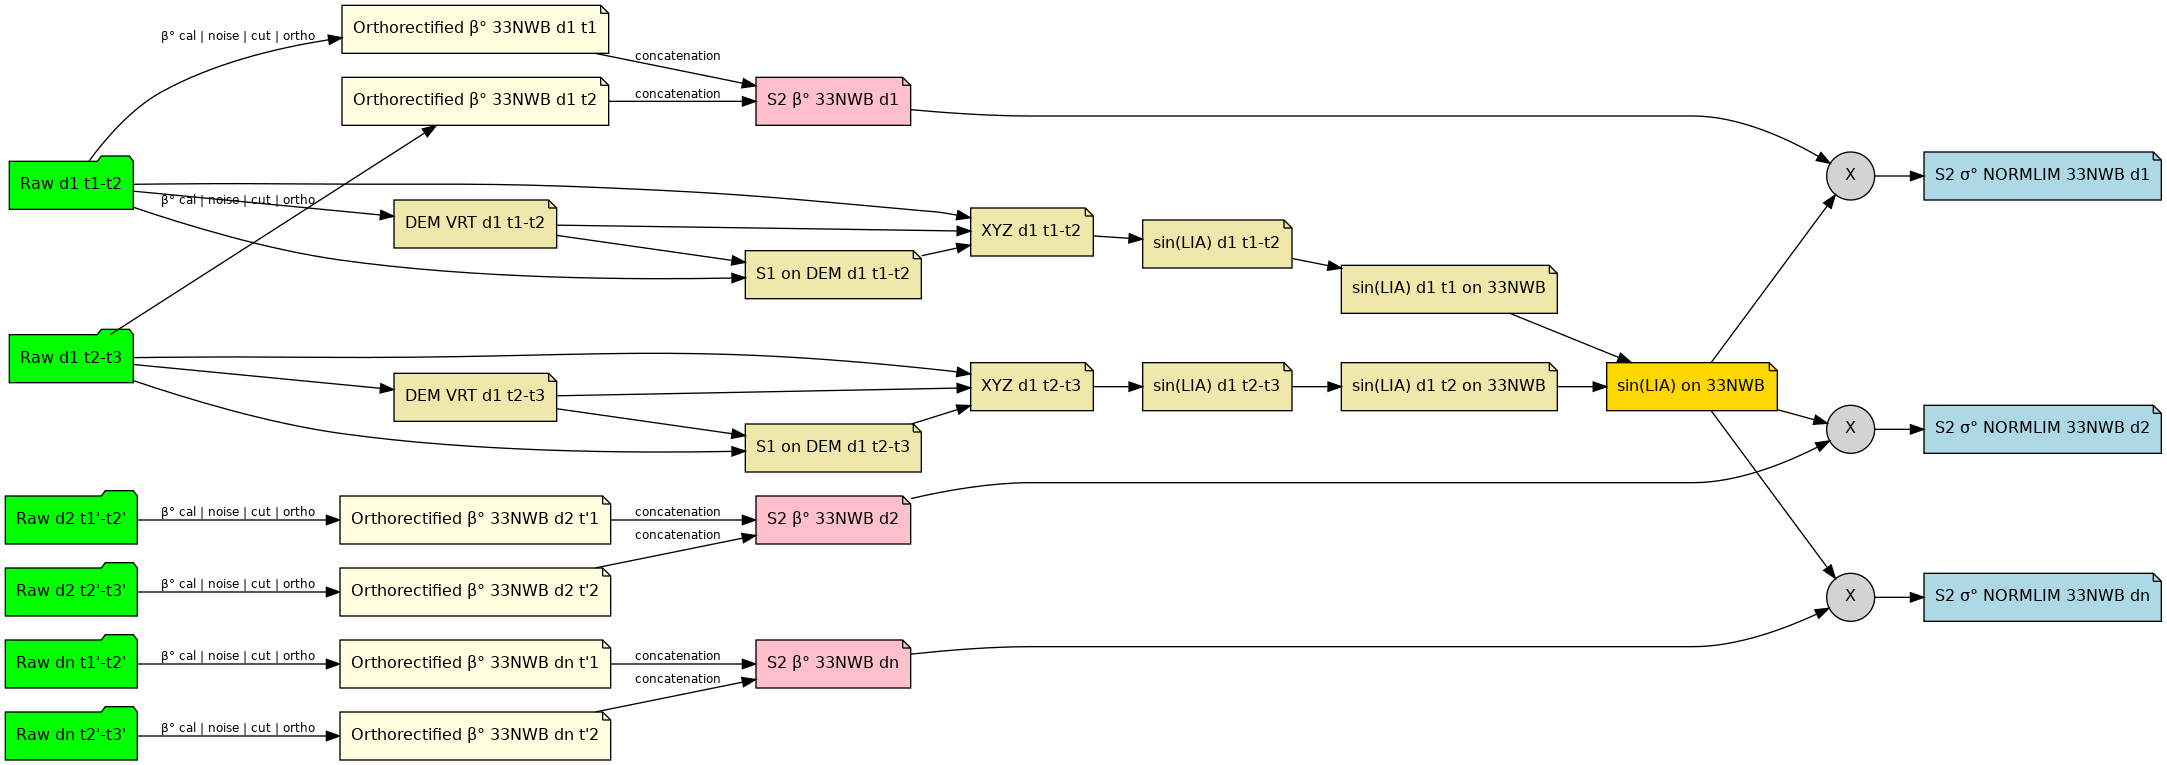 Complete task flow for processing 33NWC and 33NWB with NORMLIM calibration